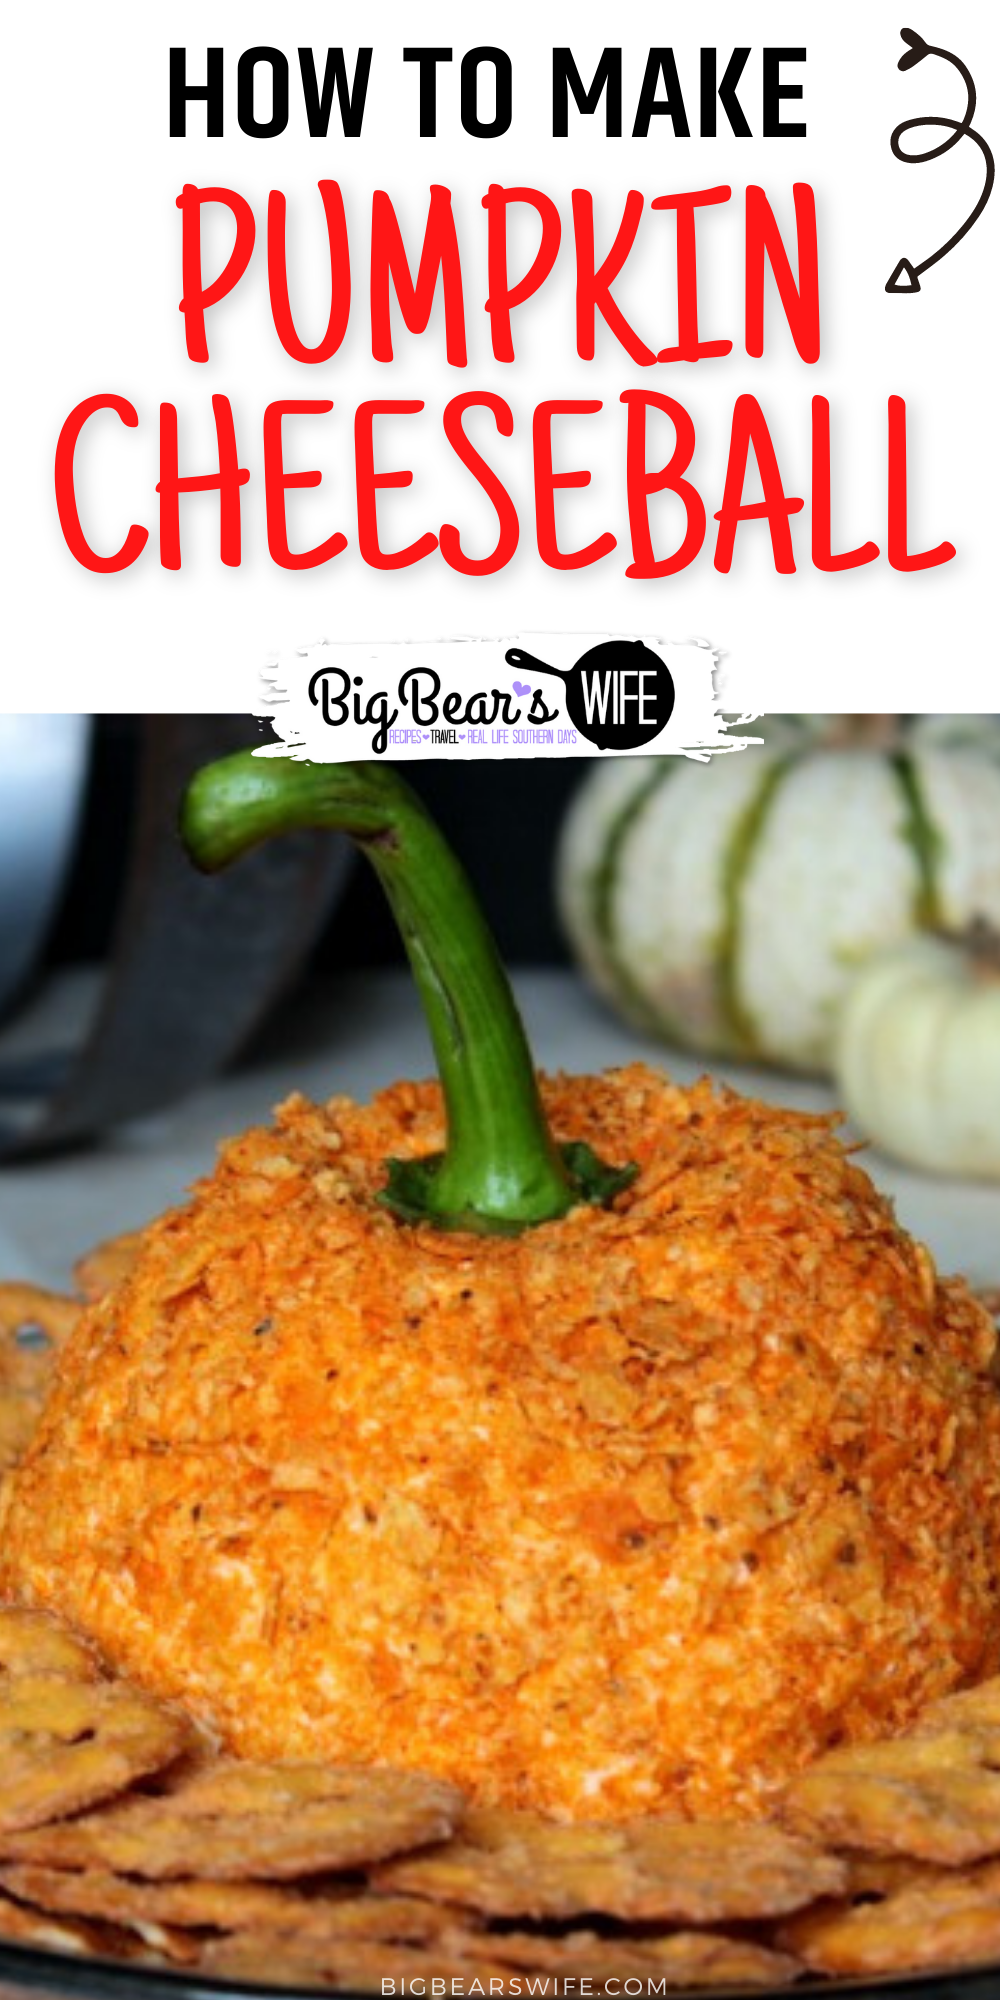 Pumpkin Cheeseball - This pumpkin cheeseball has been making an appearance at our Thanksgiving dinners for a few years now! We love digging into it while we wait for Thanksgiving dinner to finish cooking! via @bigbearswife